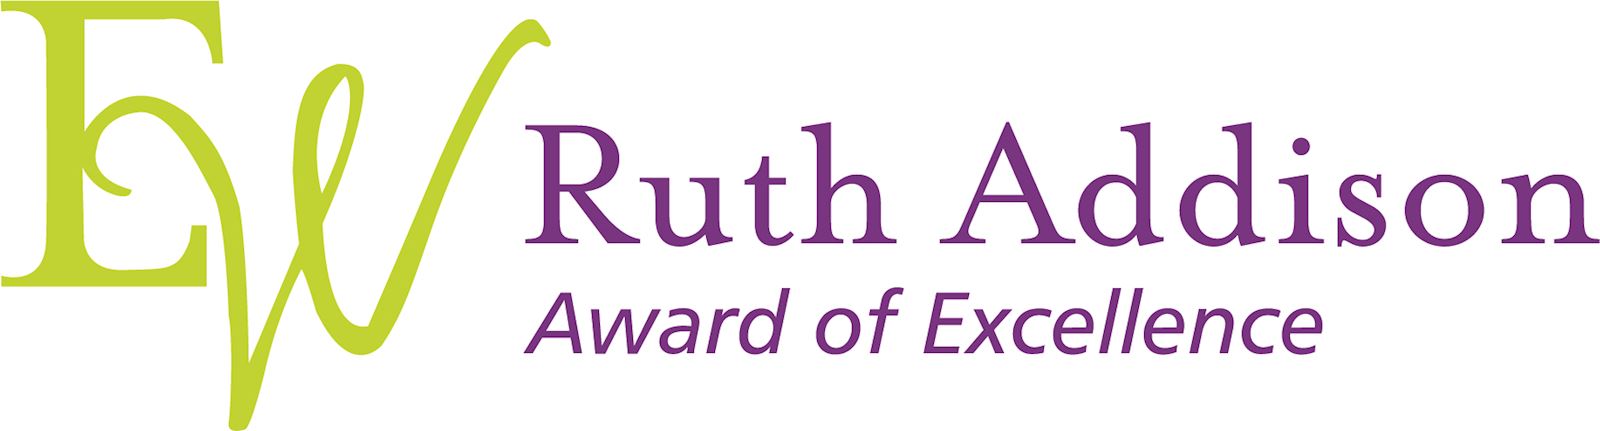 Patsy Taylor Named the EW Ruth Addison Award of Excellence 2023 Winner thumbnail